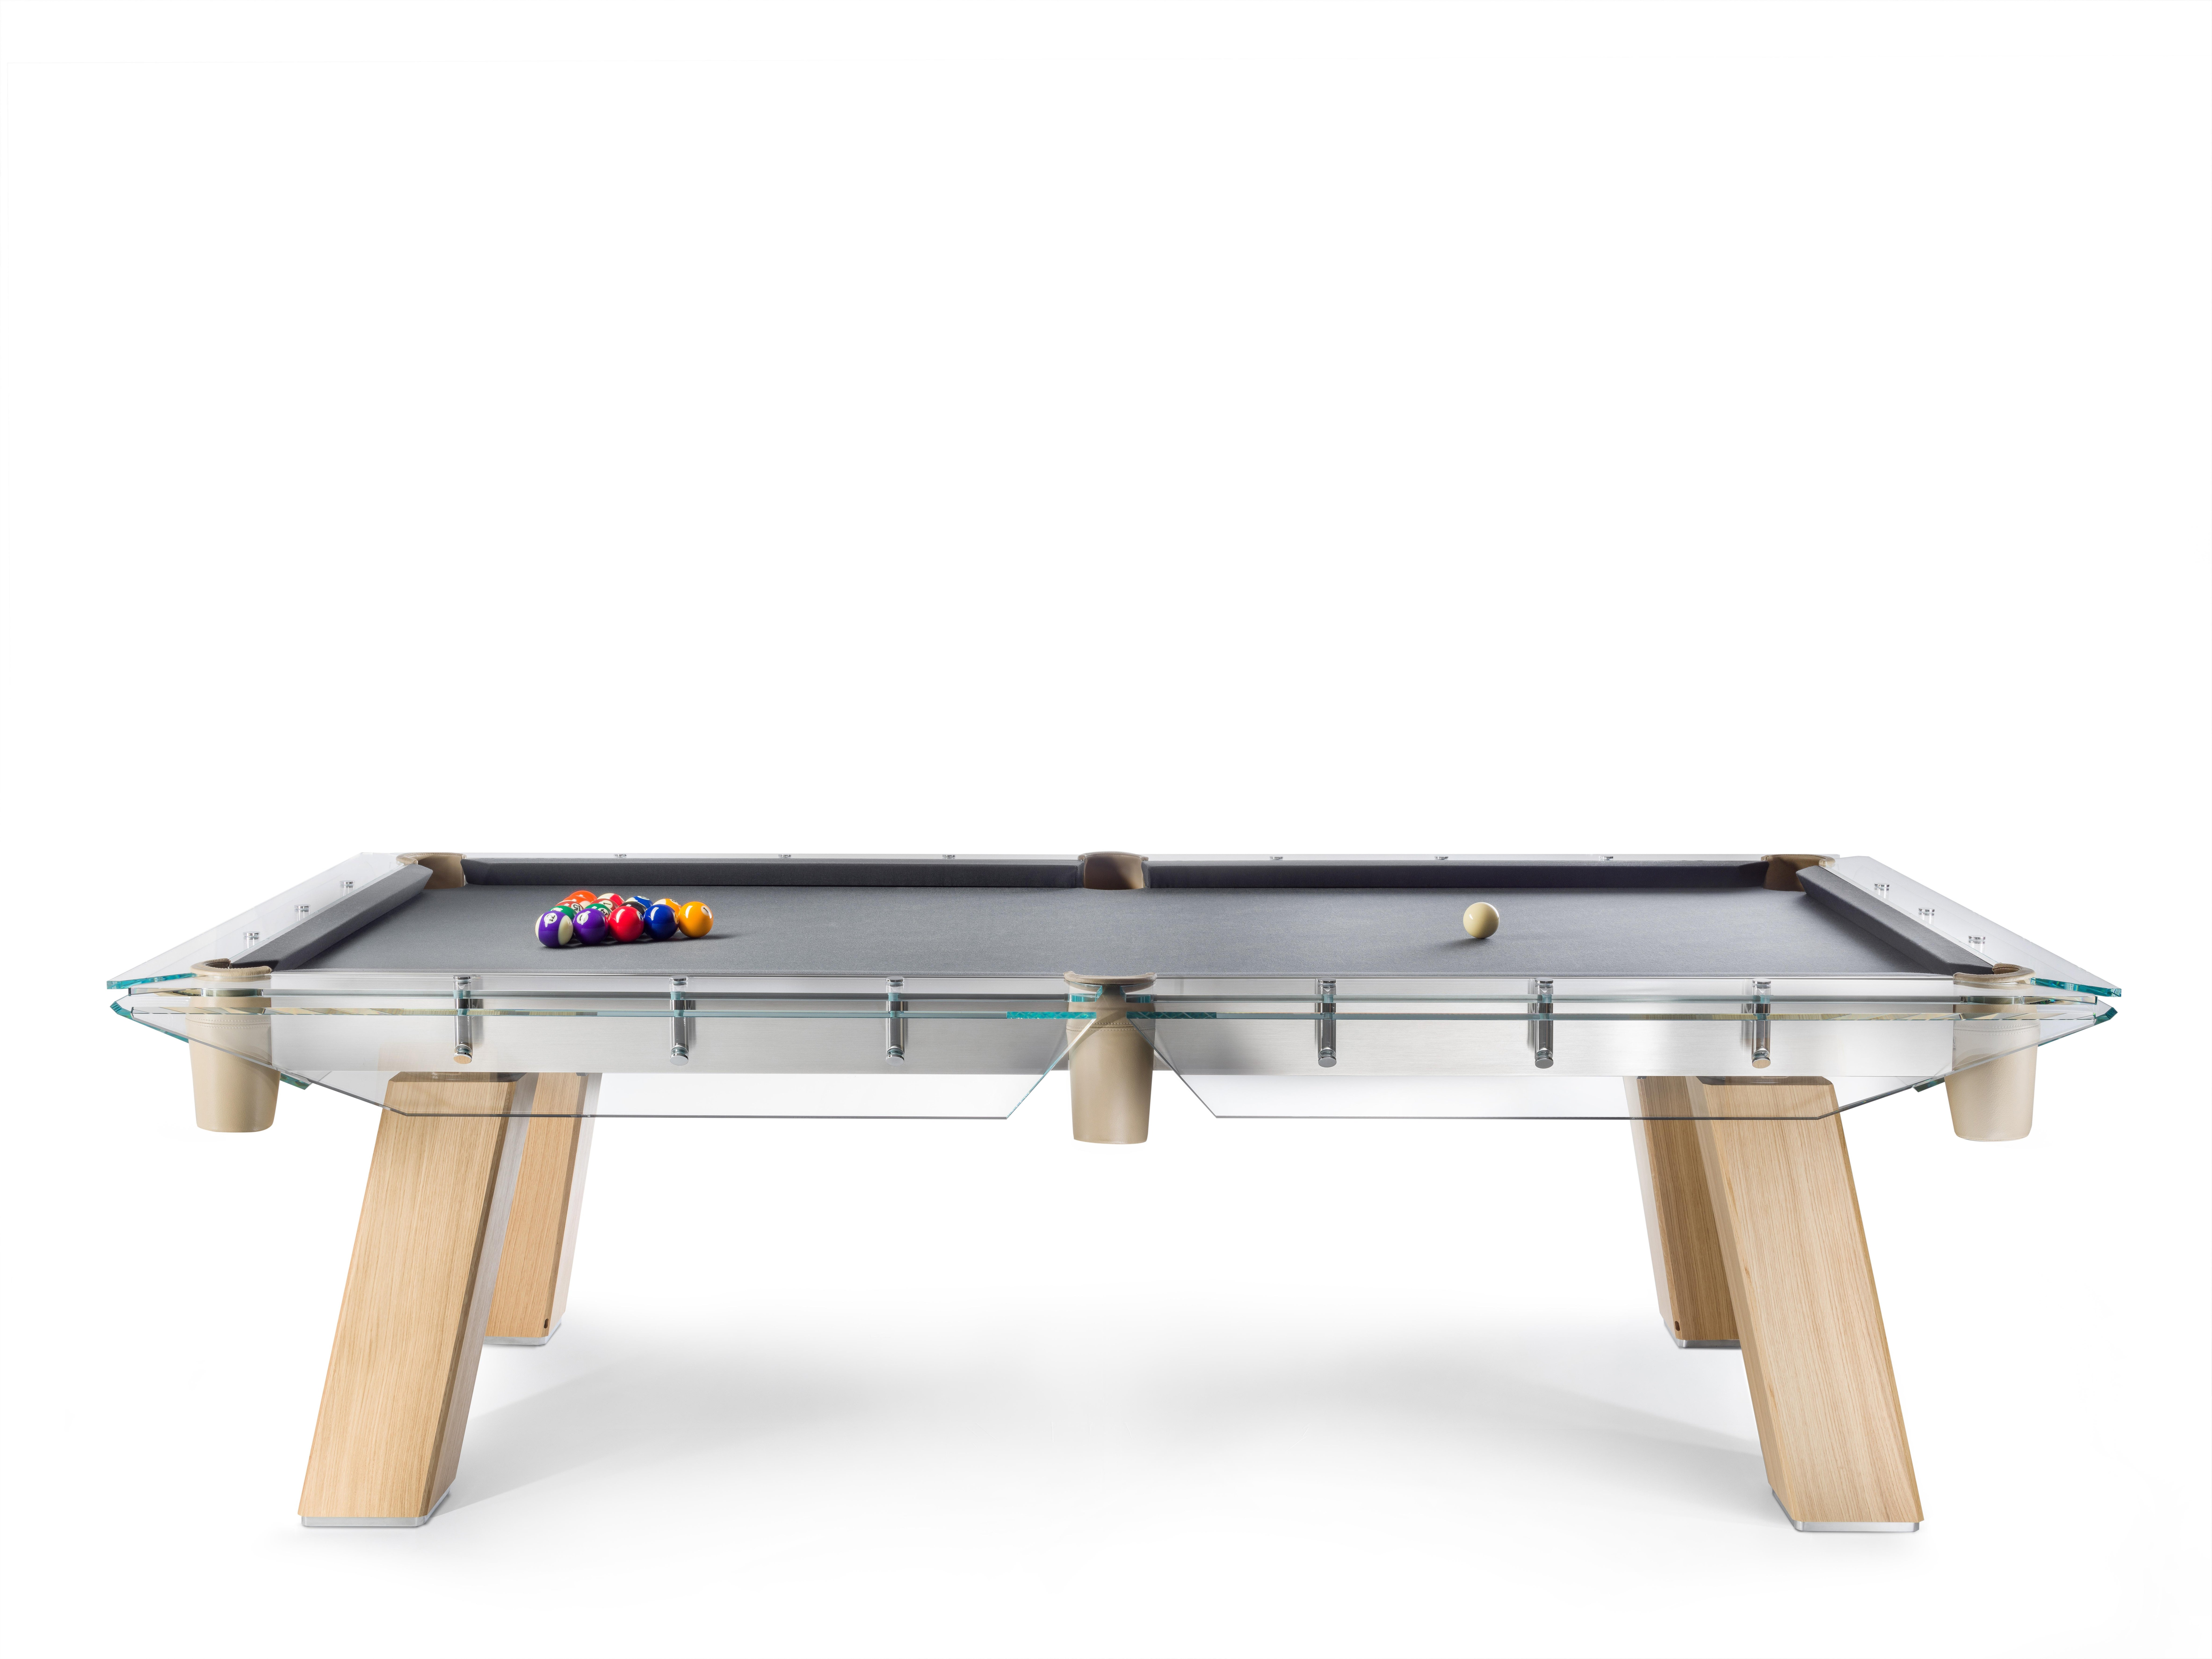 Filotto wood natural oak player pool table by Impatia
Dimensions: D268 x W152 x H82 cm
Weight: 640 kg
Material: Frame in low-iron glass.Legs in wood.Metal components.Three piece Italian slate base,Simonis cloth,Leather pockets.
Also available: